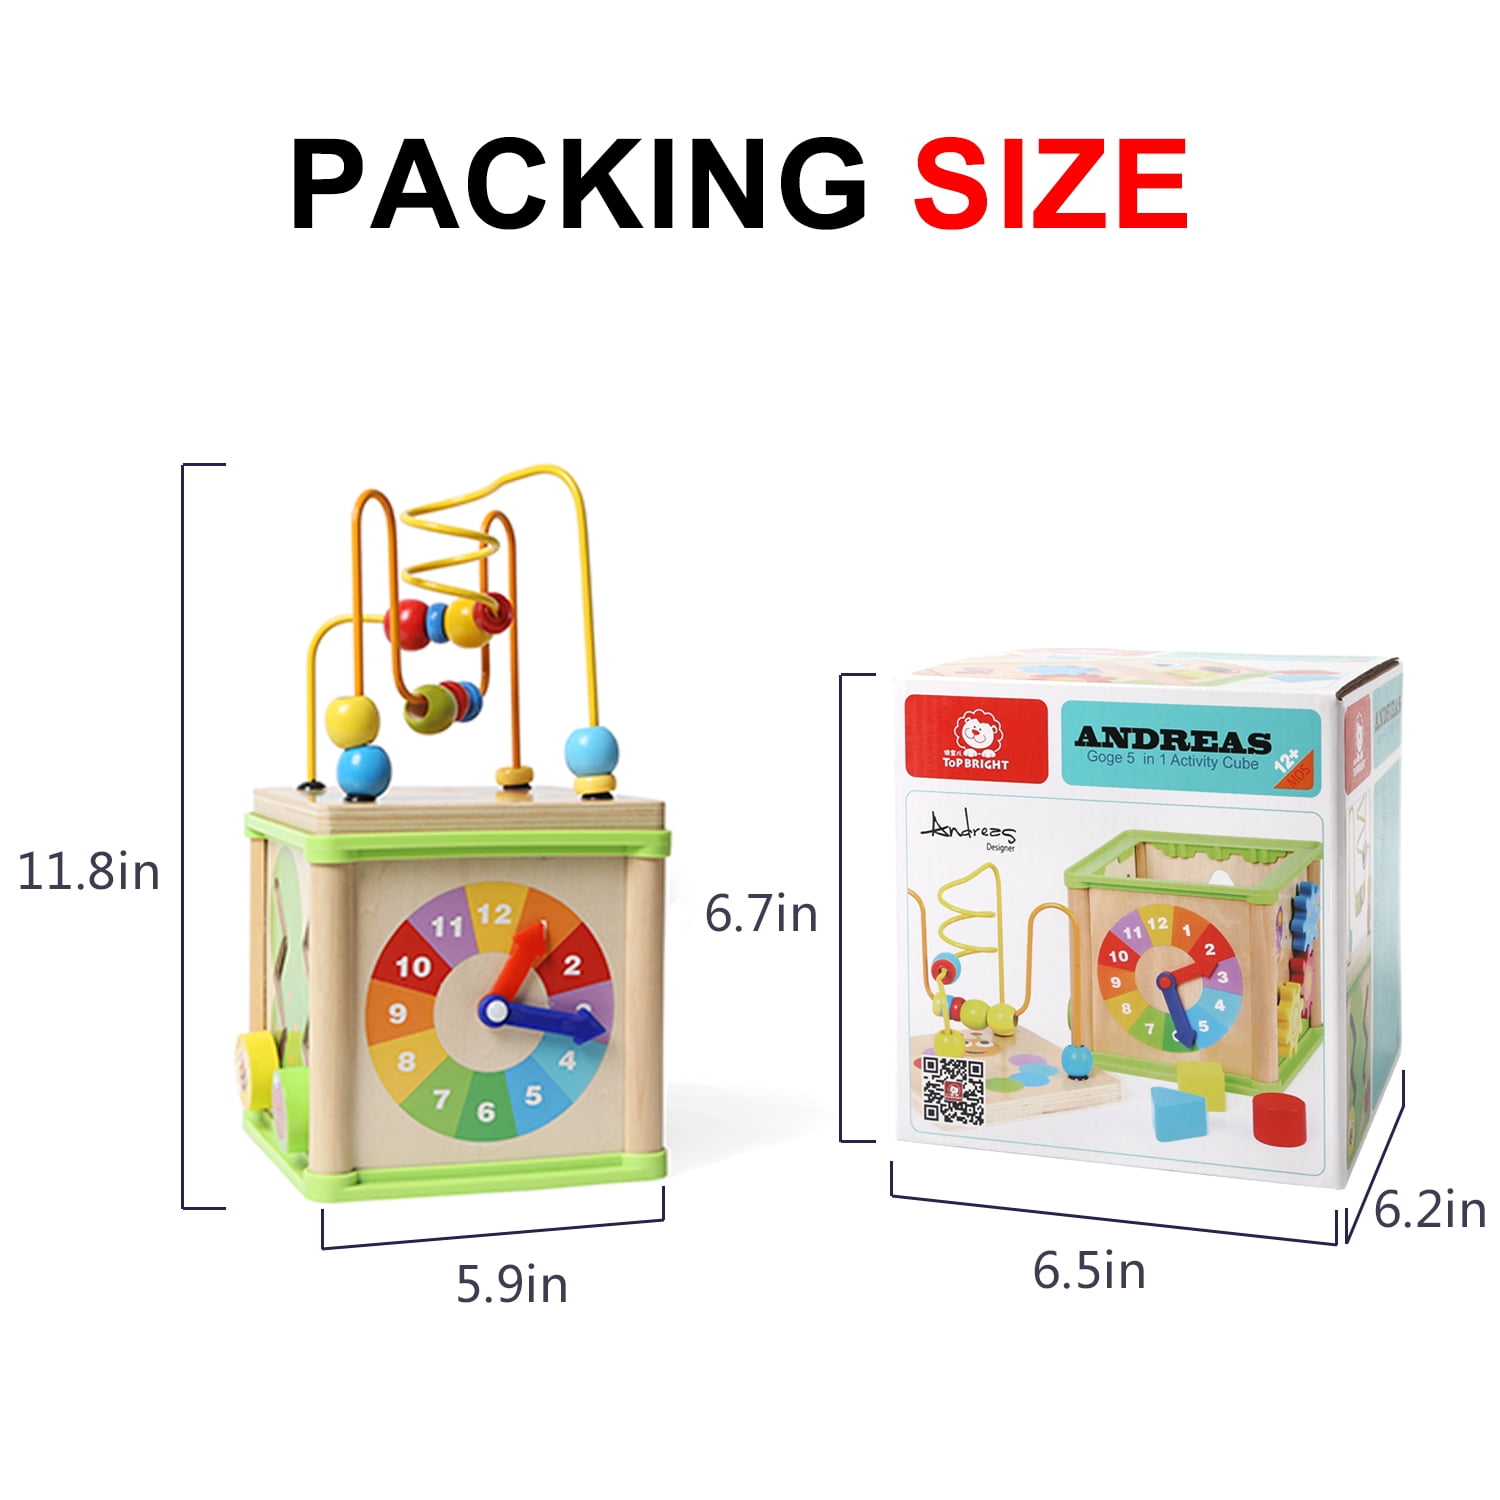 TOP BRIGHT Activity Cube Toys Baby Educational Wooden Bead Maze Shape Sorter for 1 Year Old Boy and Girl Toddlers Gift Small Size 